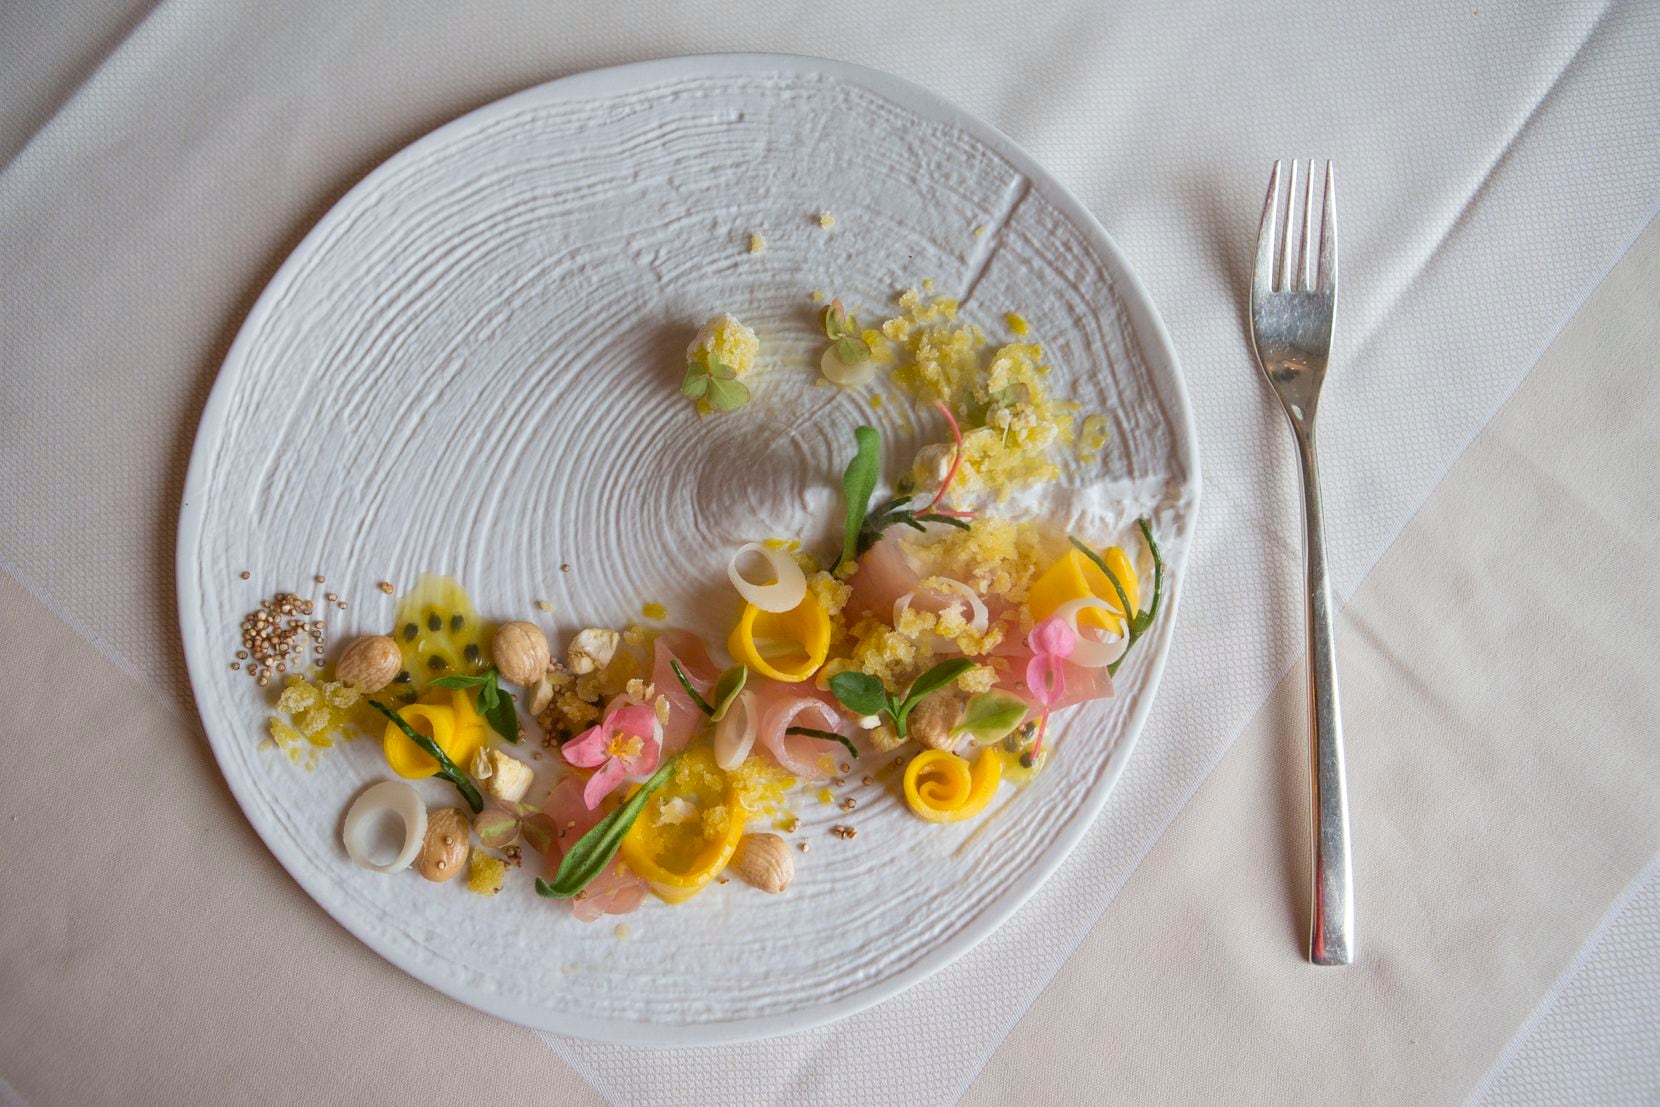 In 2017, Stephan Pyles Flora Street Cafe served beautiful, colorful dishes like this crudo...